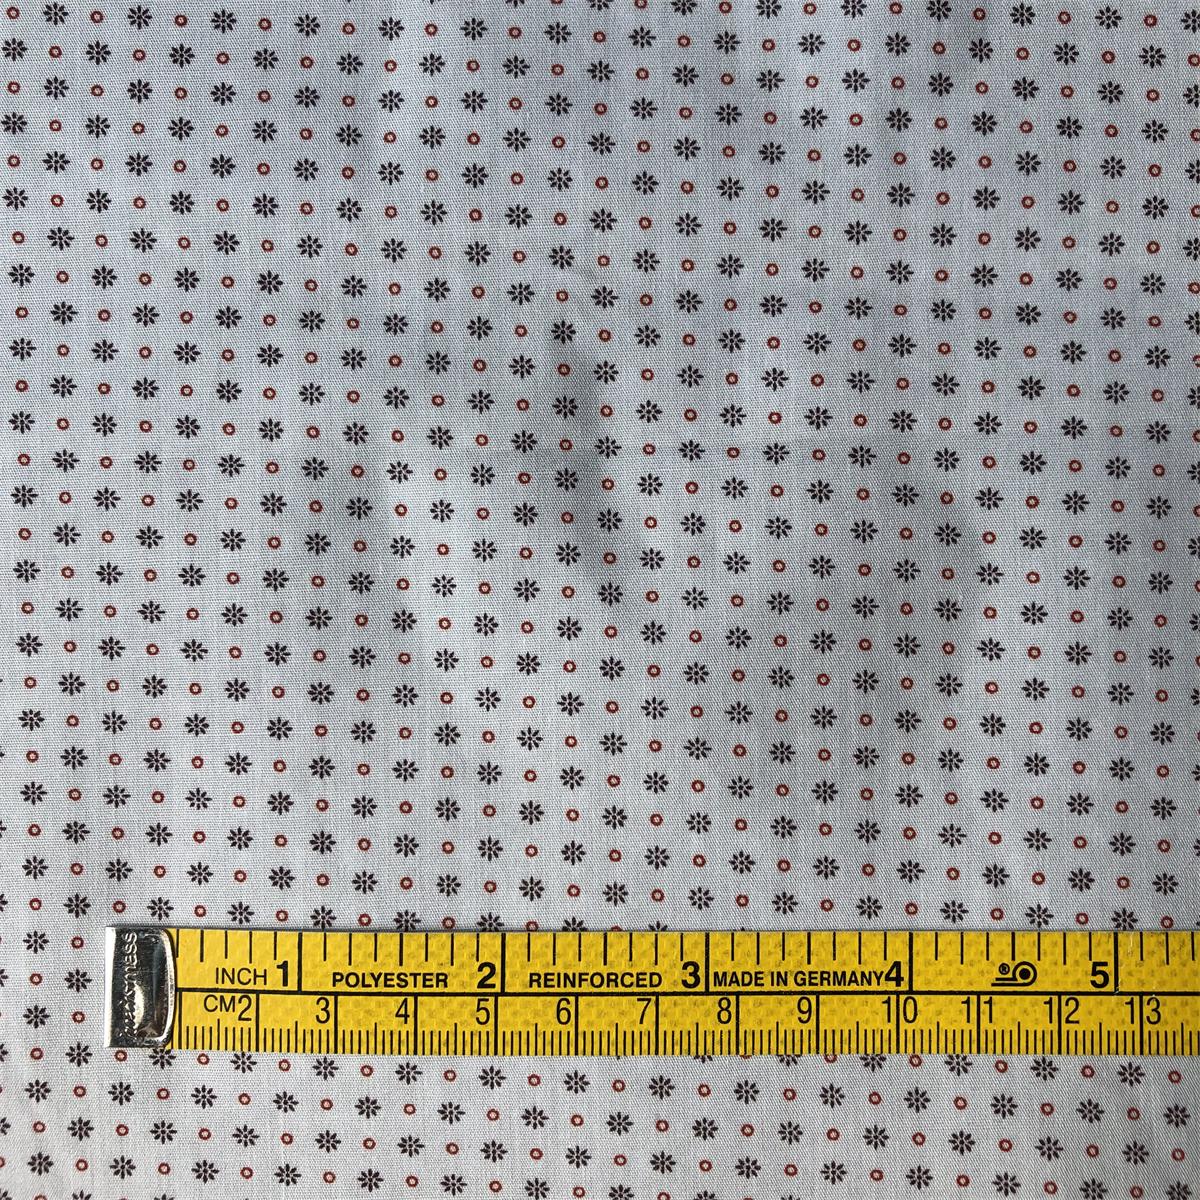 China Textile Cotton fabric 50S compact yarn soft for mens shirts 100 Cotton poplin printed silky soft shirts fabric 